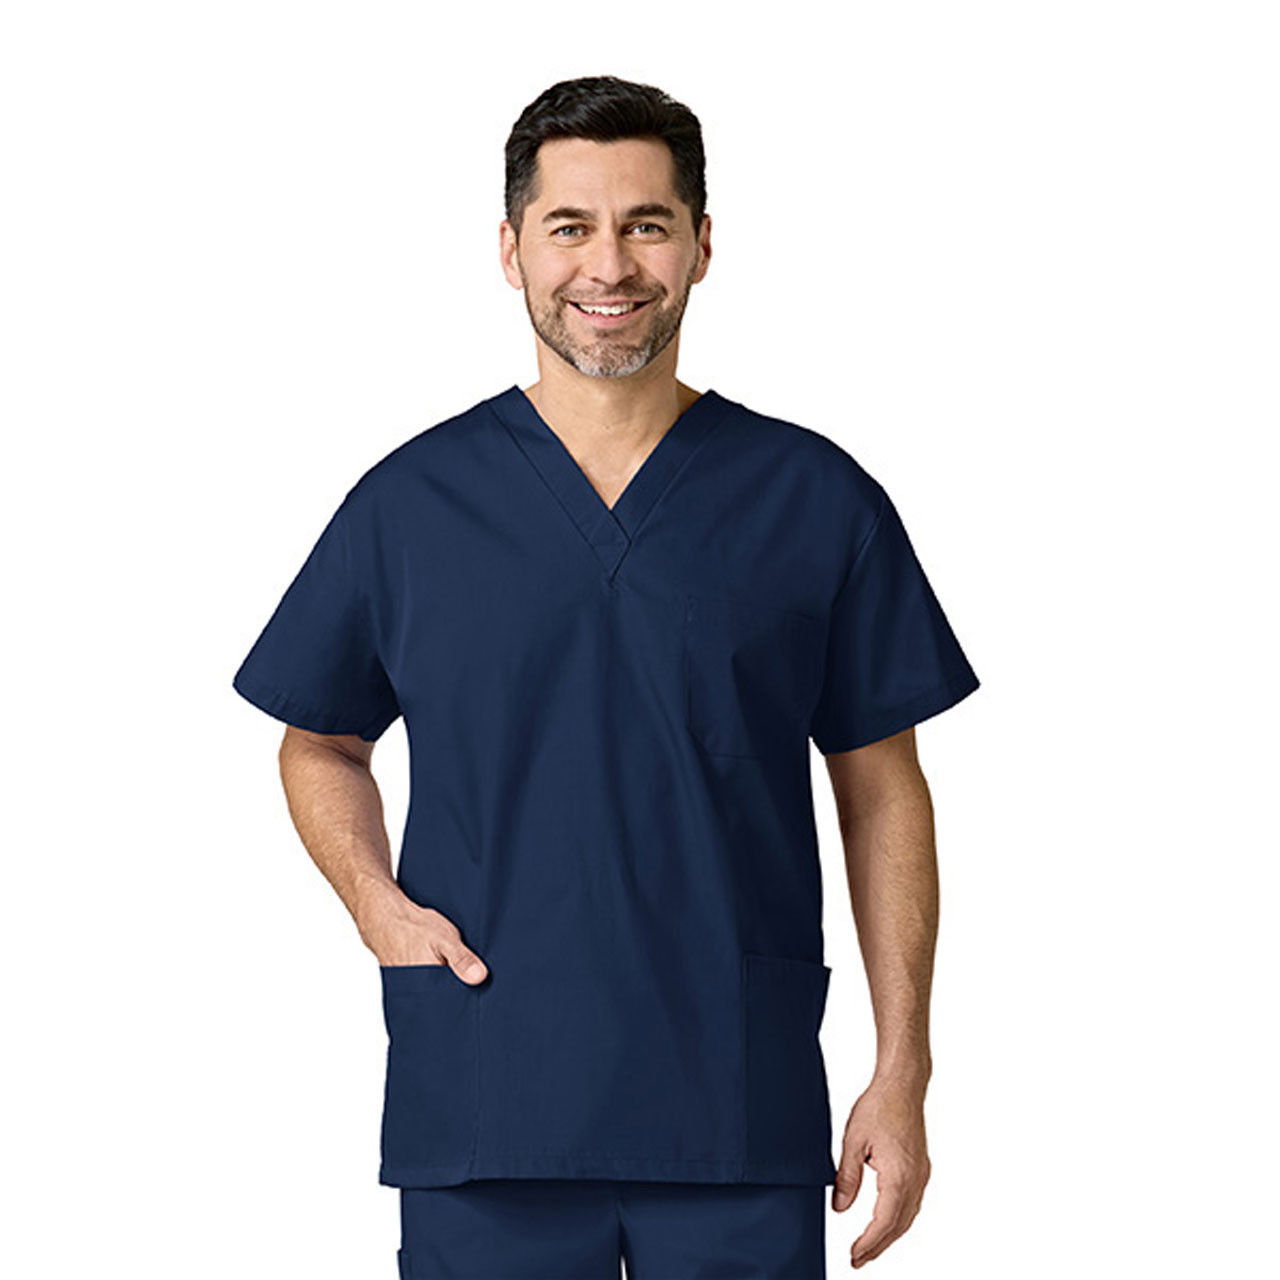 Navy Blue Scrub Top - Unisex Questions & Answers